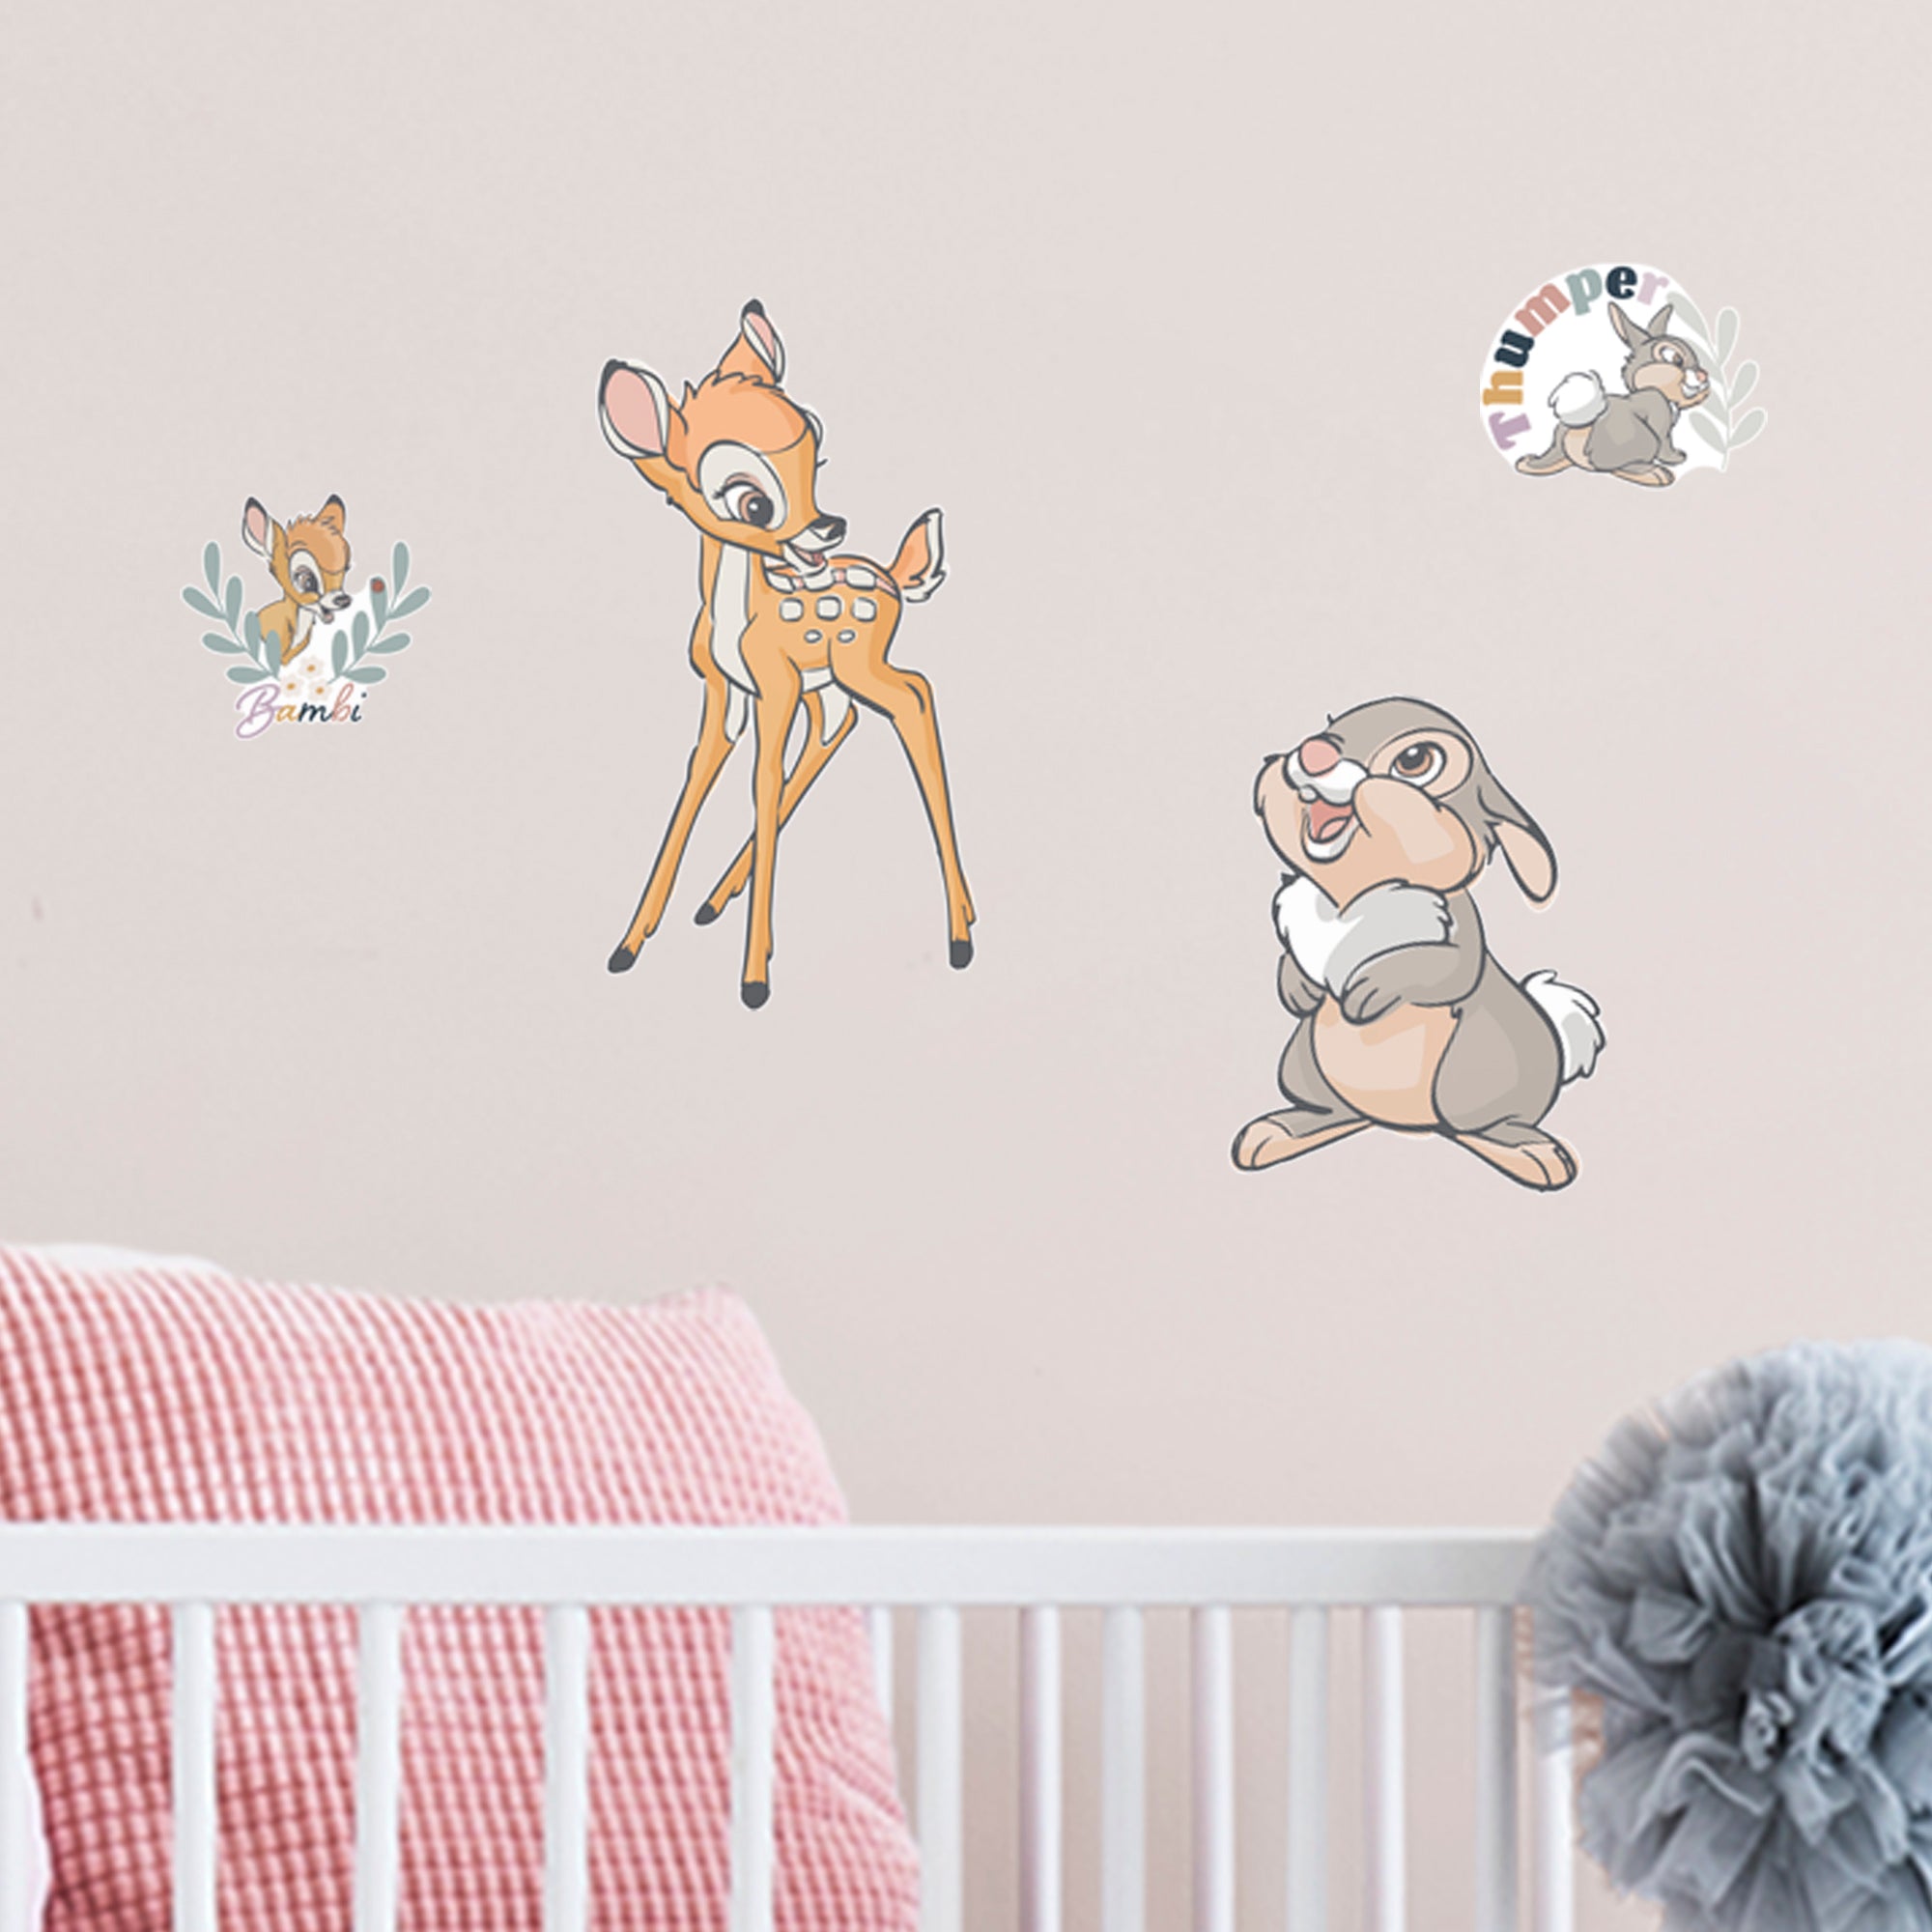 Bambi and Thumper Before the Bloom - Officially Licensed Disney Removable Wall Decal Large by Fathead | Vinyl